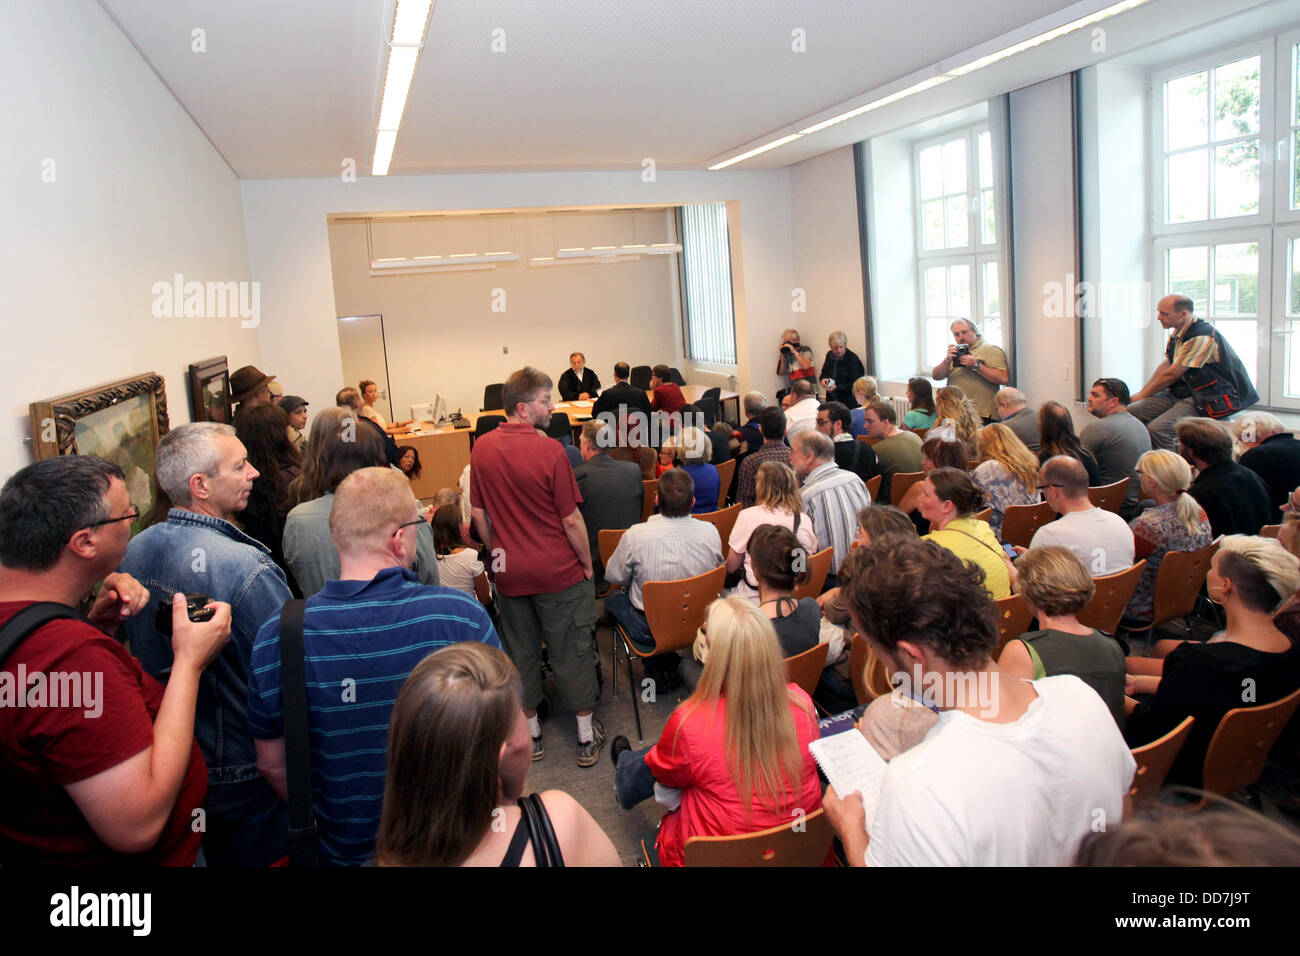 Numerous supporters wait for the beginning of the trial about the suspension of the employee of the Hamburg job-center, Inge Hannemann, in the courtroom of the labor court in Hamburg, Germany, 28 August 2013. Hannemann was responsible for welfare recipients of unemployed benefit (Hartz IV). At the same time she opposed the Hartz IV legislation. Photo: BODO MARKS Stock Photo